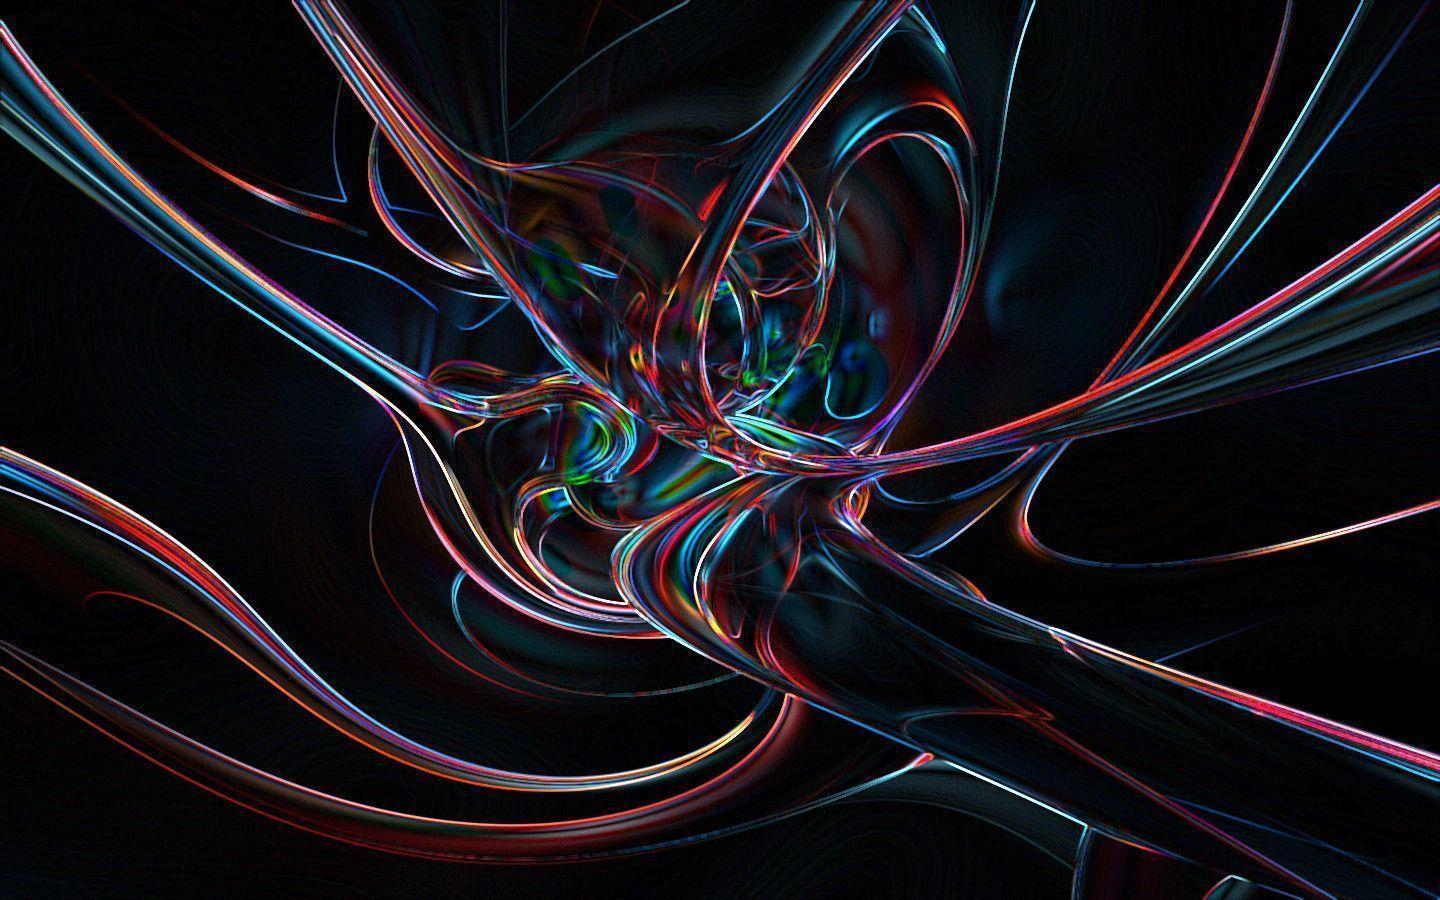 Swirly Wallpapers - Wallpaper Cave